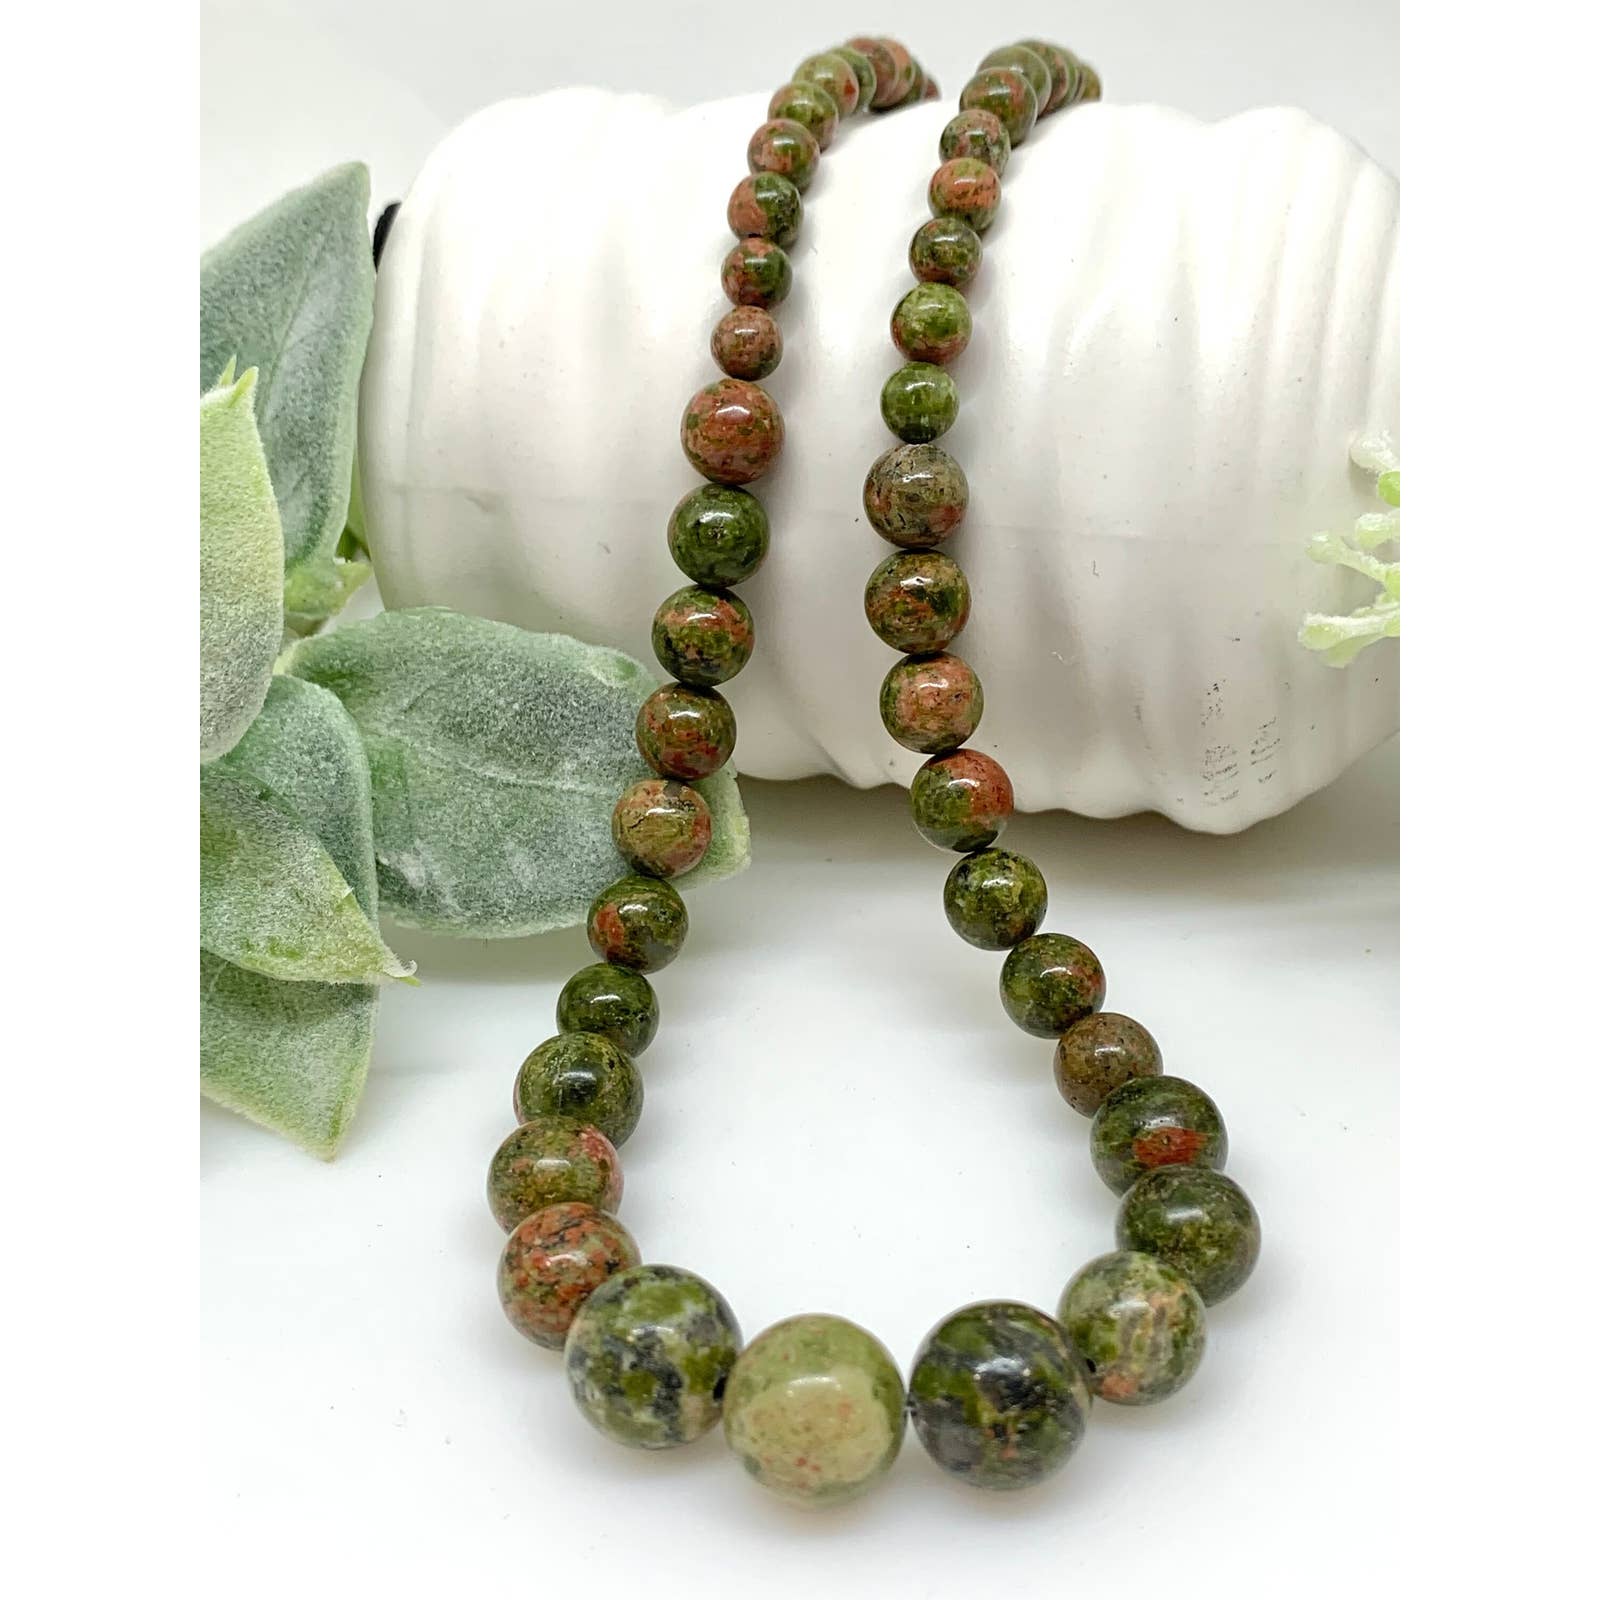 Unakite Necklace - Natural Stones Jewelry